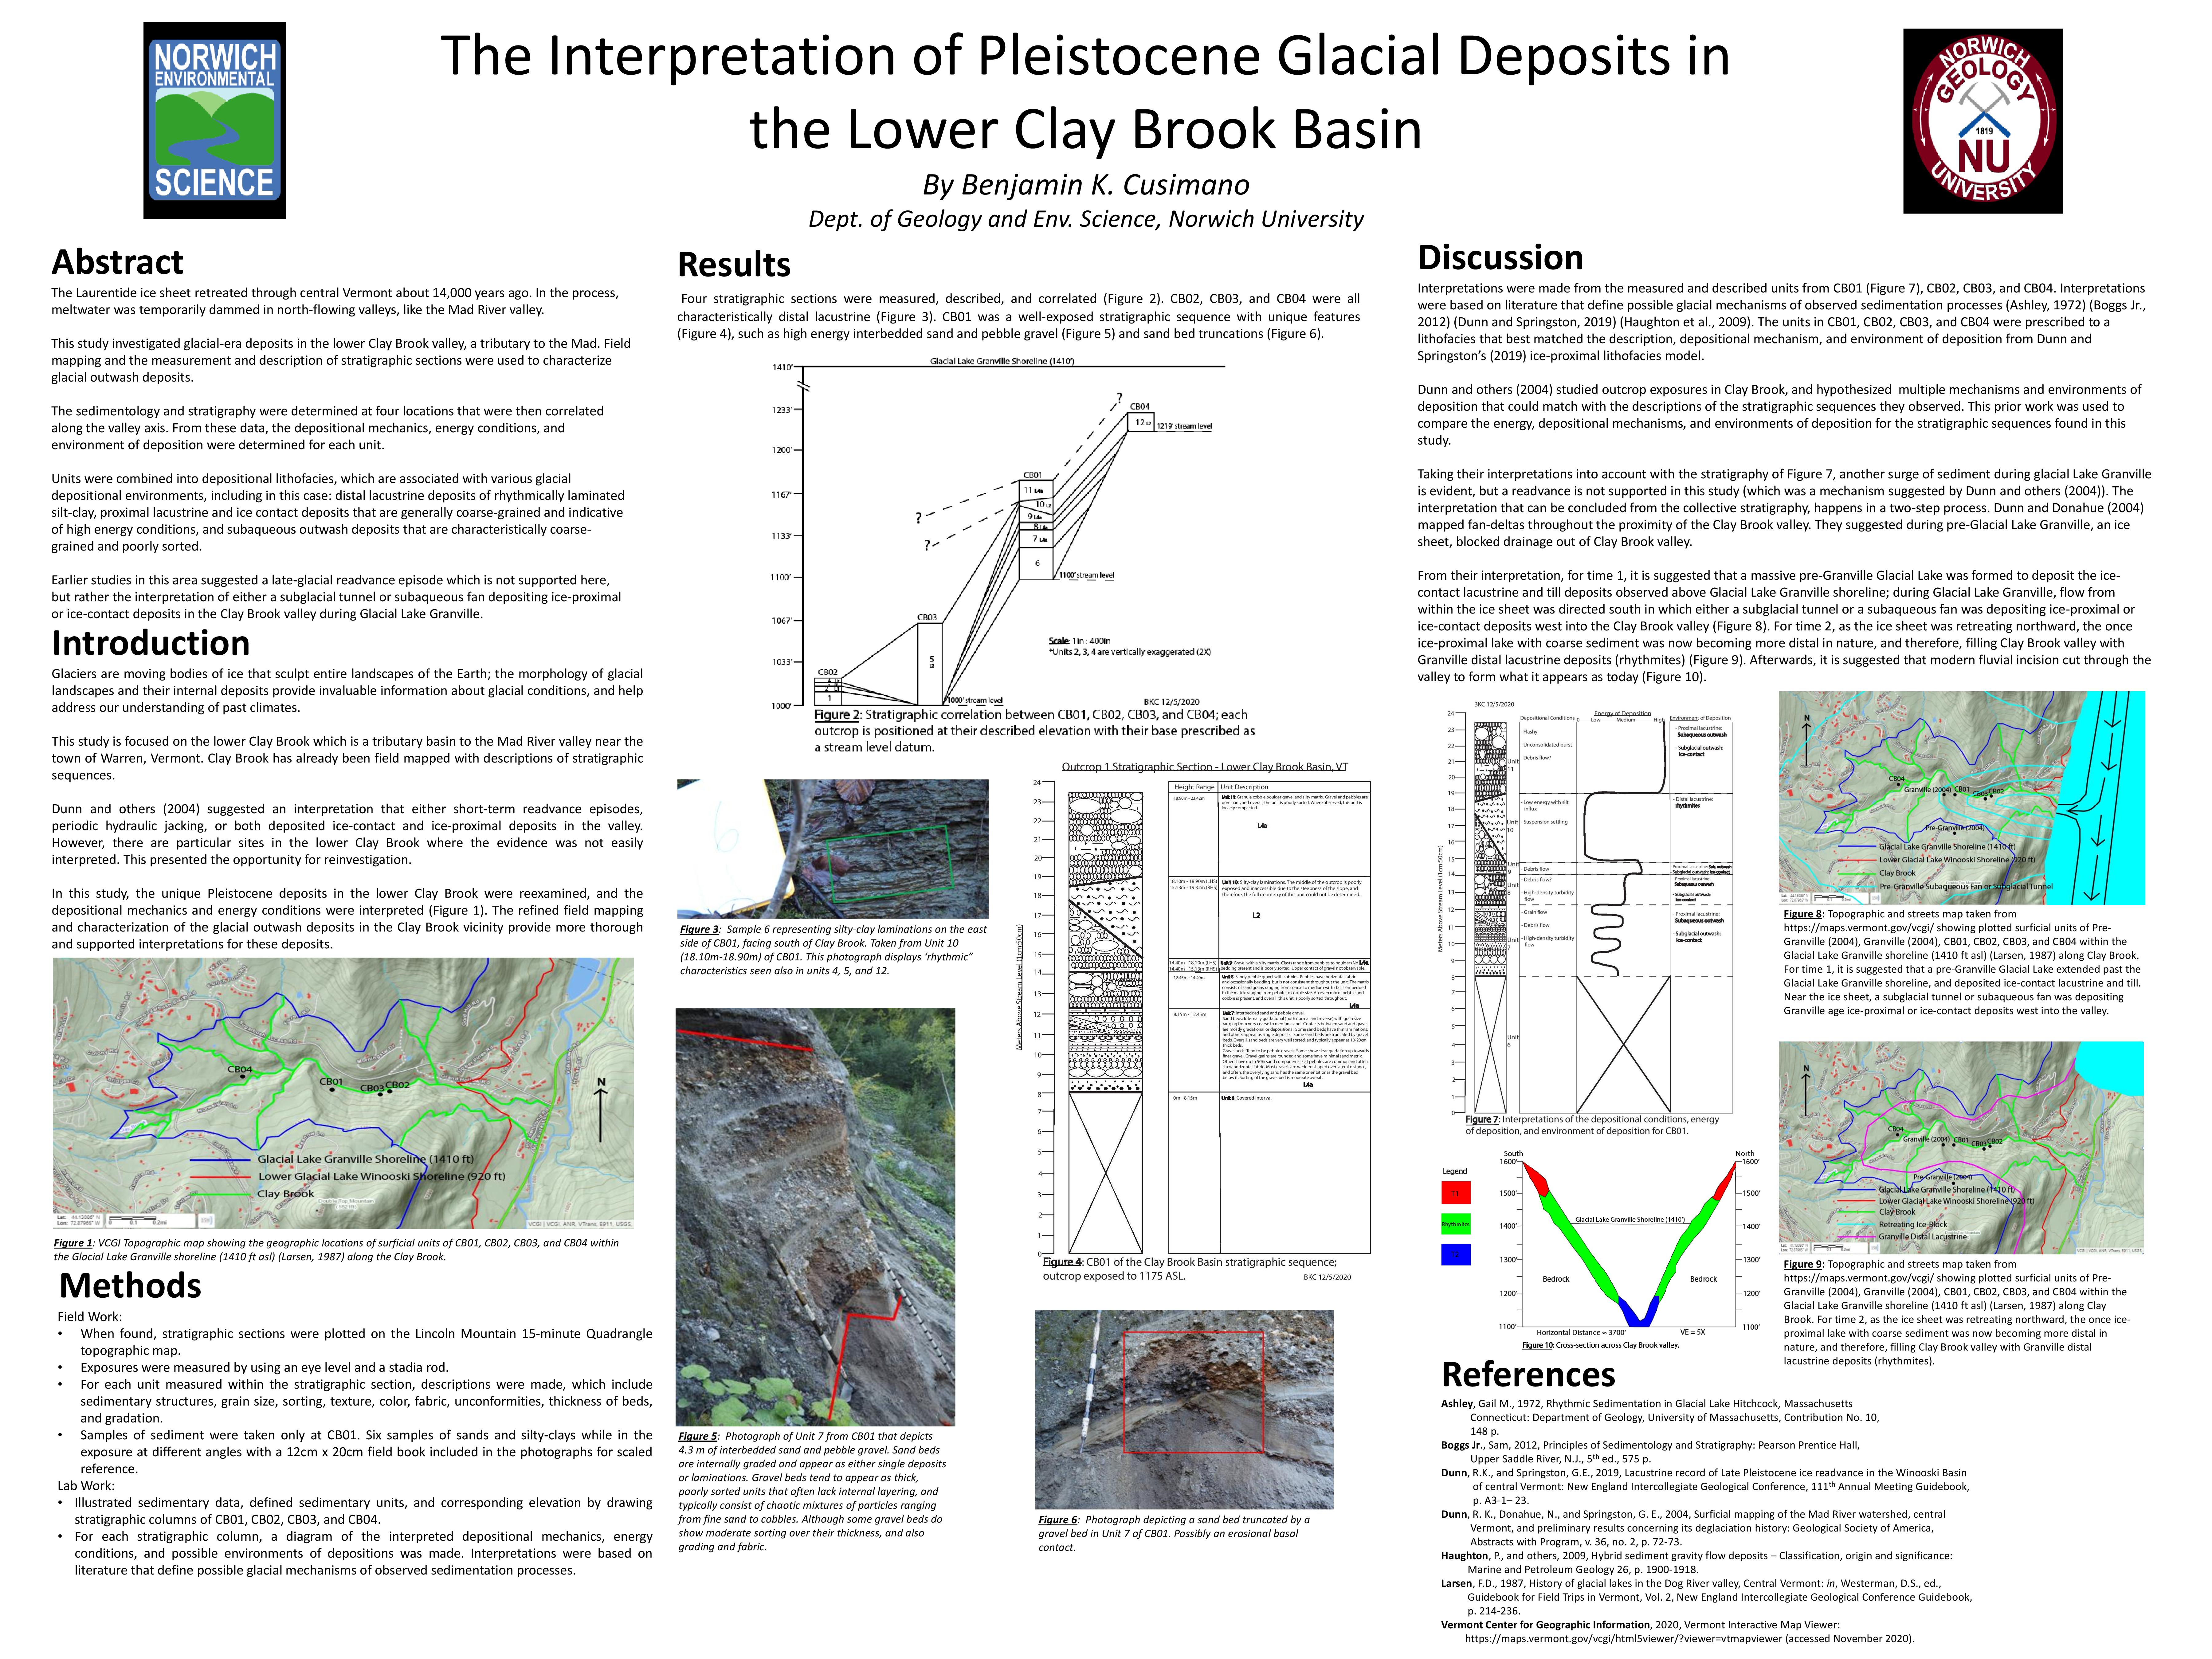 Showcase Image for The Interpretation of Pleistocene Glacial Deposits in the Lower Clay Brook Basin